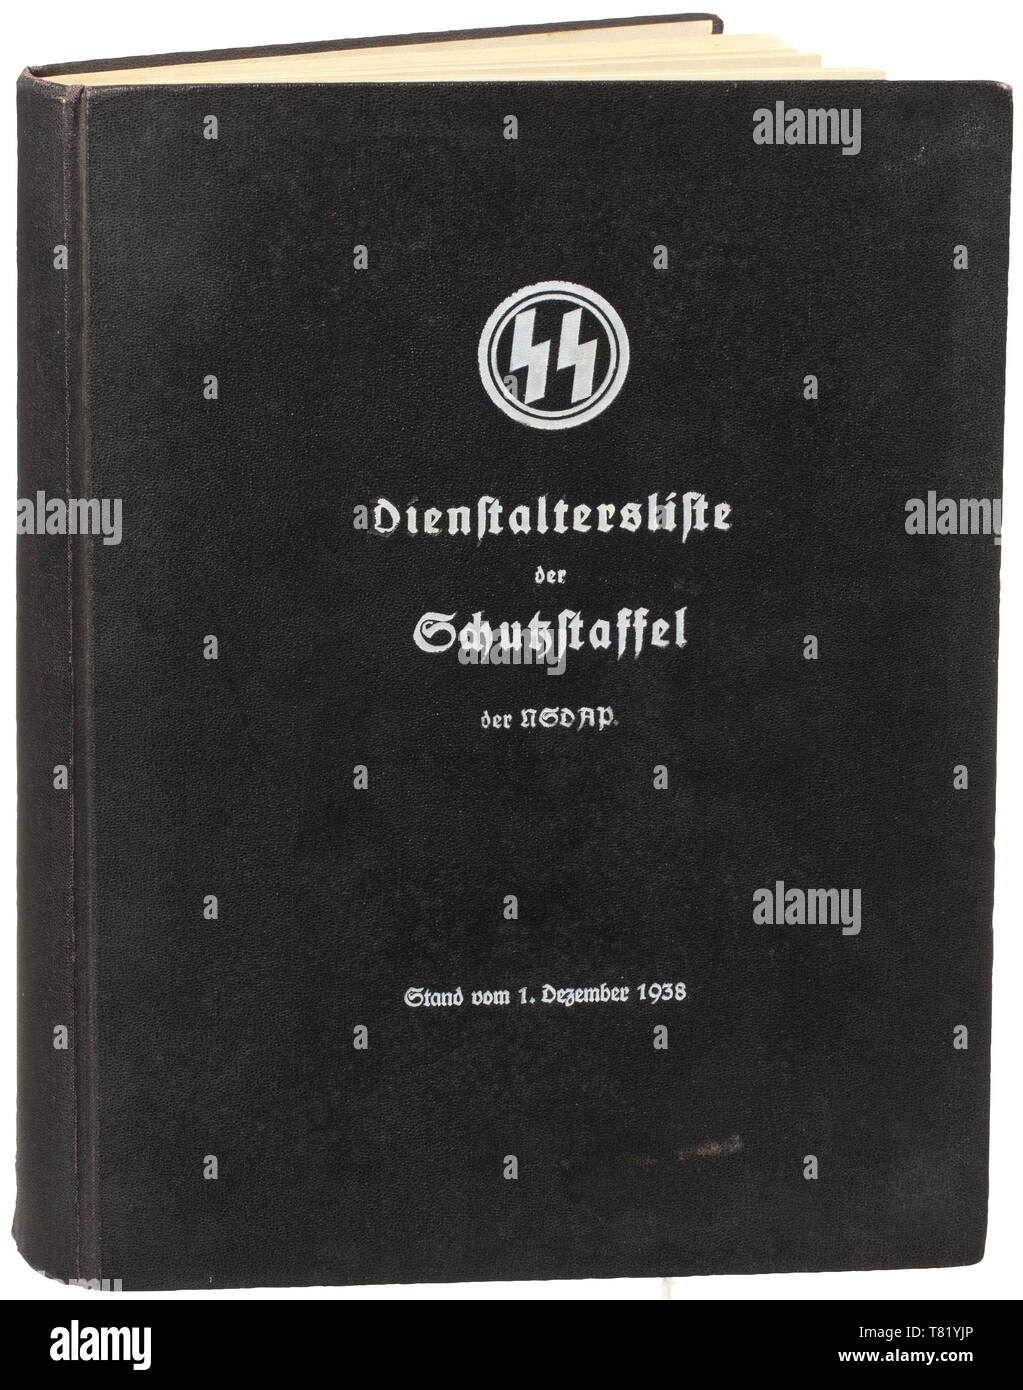 Sepp Dietrich - a Schutzstaffel officer seniority list as of 1 December 1938. Prepared by the personnel office of the Reichsführer-SS. Circa 13,800 officers, listed by service grade (Obergruppenführer to Untersturmführer) with information on official position, party- and SS numbers, birth date, date of each promotion, Totenkopf Ring award, Reichsführer Honour Sword award, Blood Order etc. Included is a listing of those officers who were trained at Führer schools, had dropped out or were expelled. Black cover with stamped white runes and lettering. Flyleaf with inventory sta, Editorial-Use-Only Stock Photo